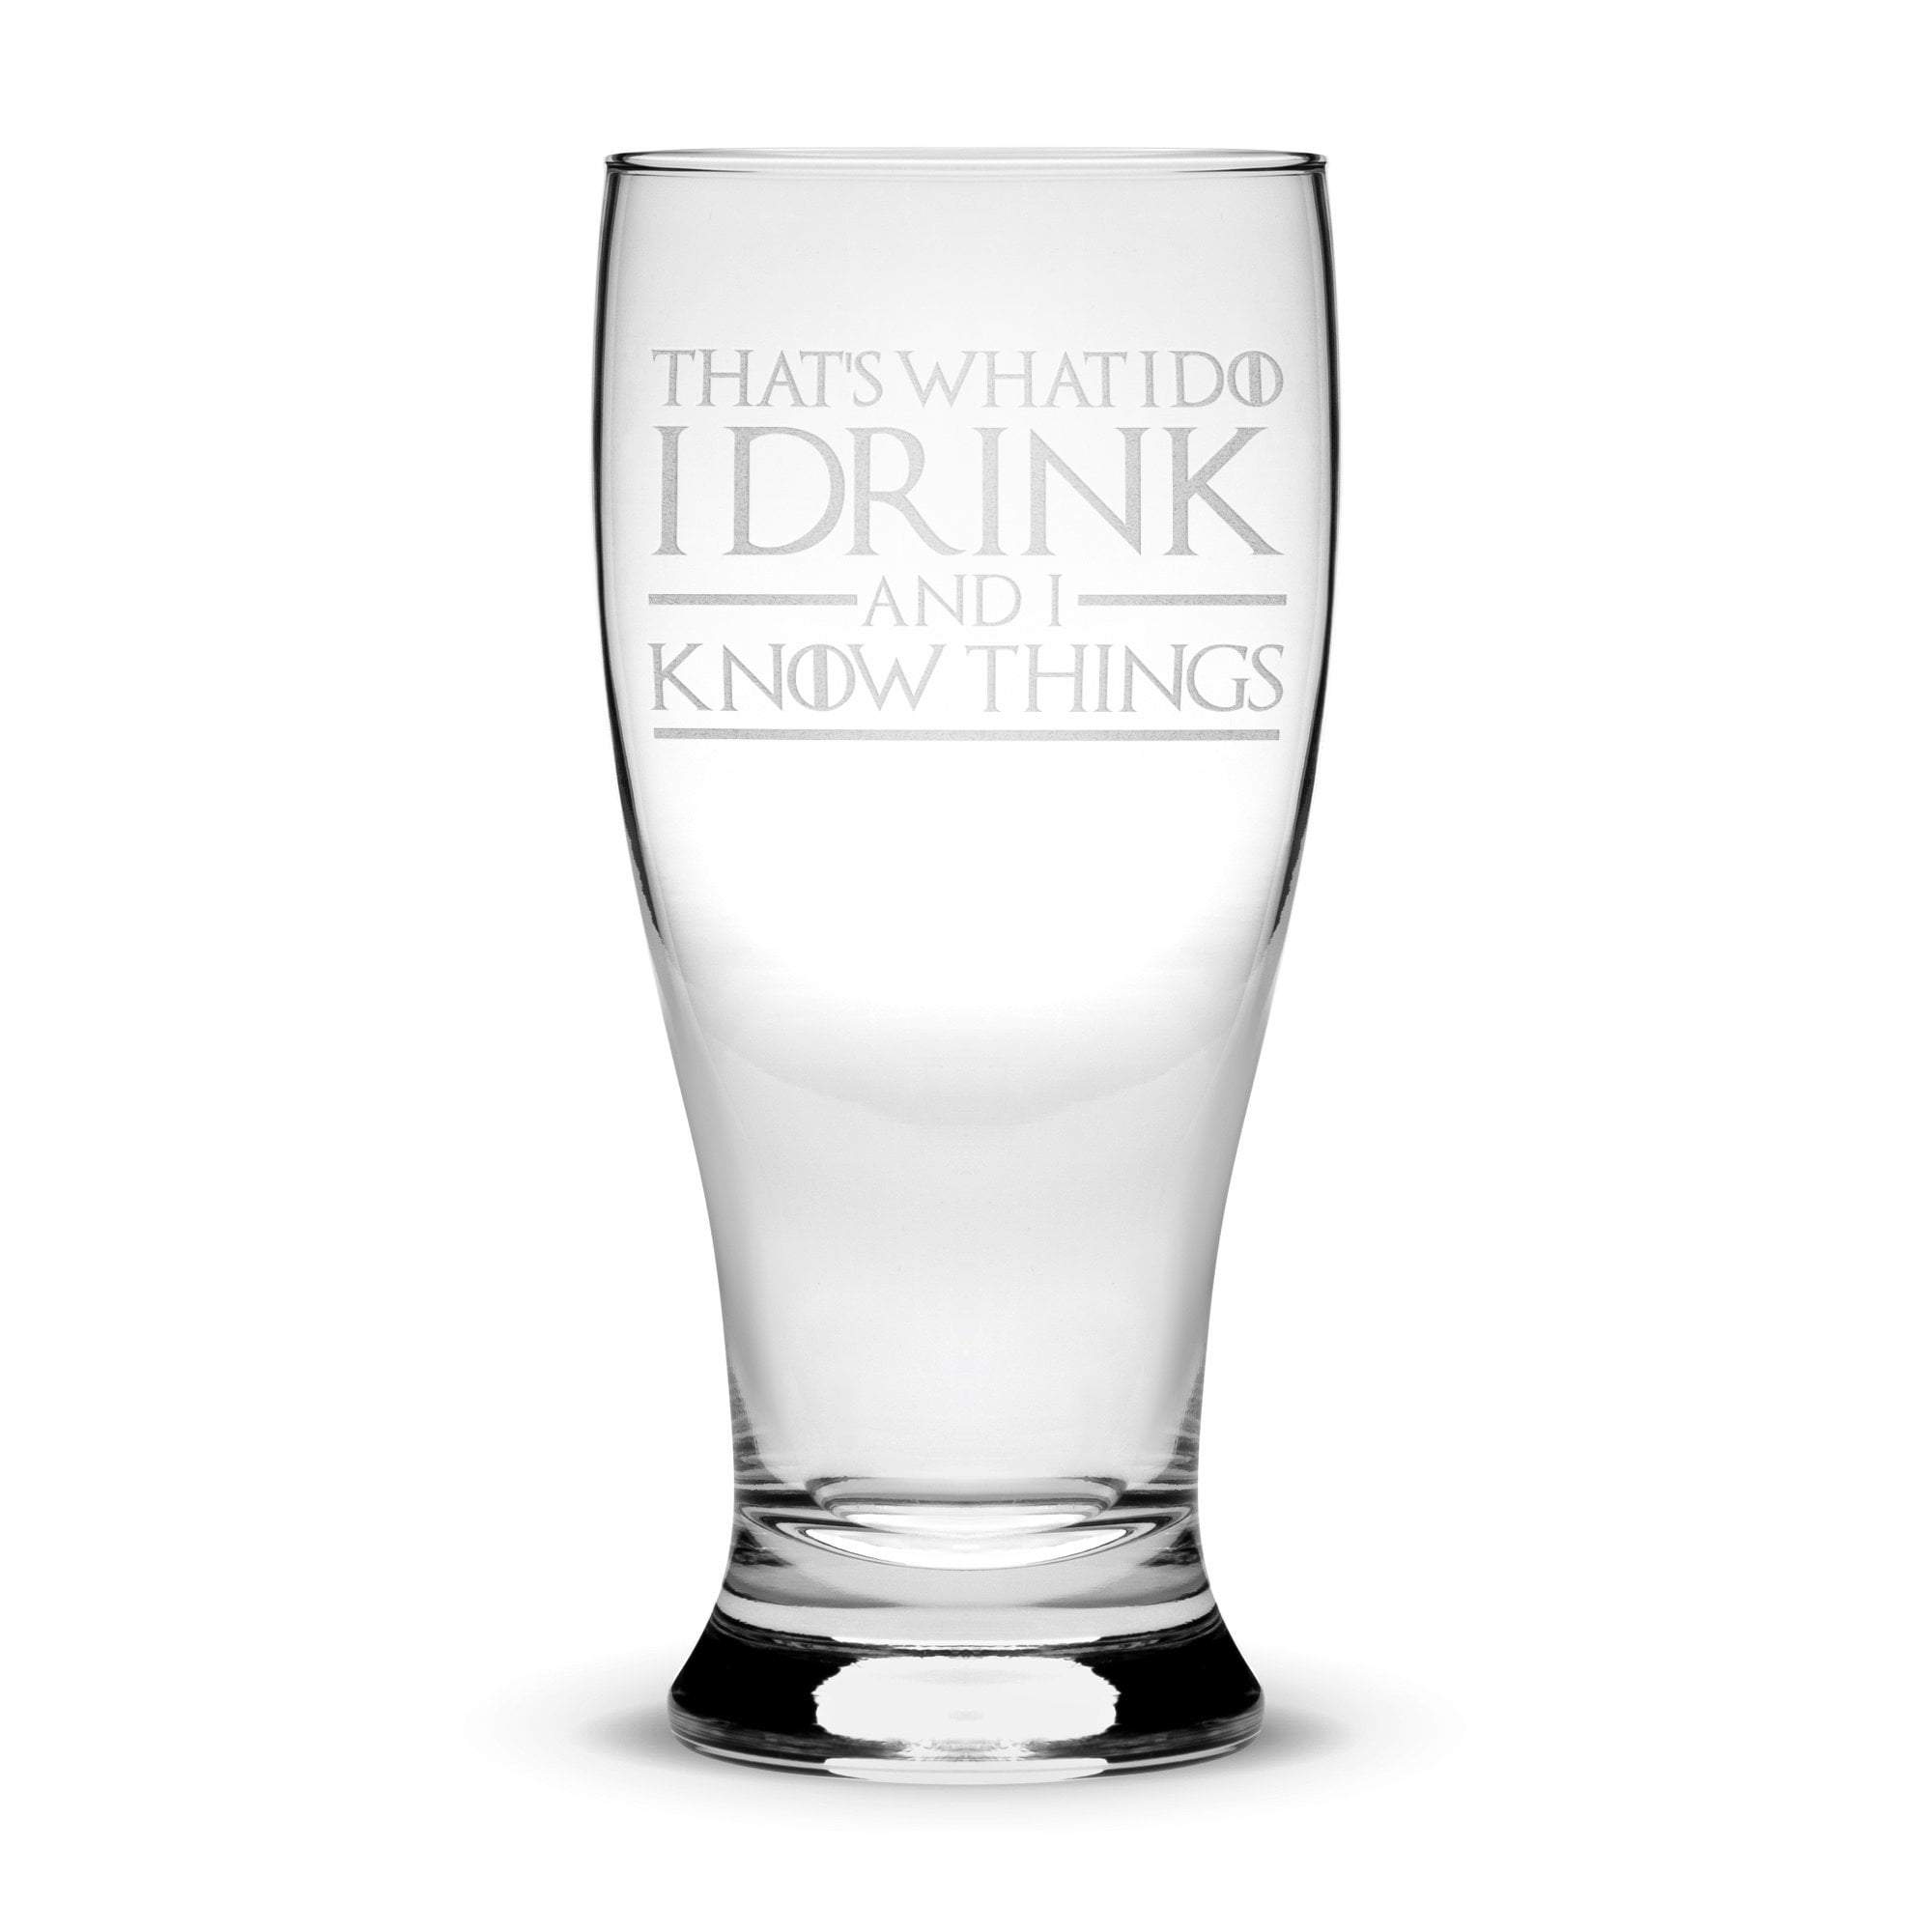 Premium Game of Thrones Pilsner Glass, That's What I Do I Drink and I Know Things Integrity Bottles